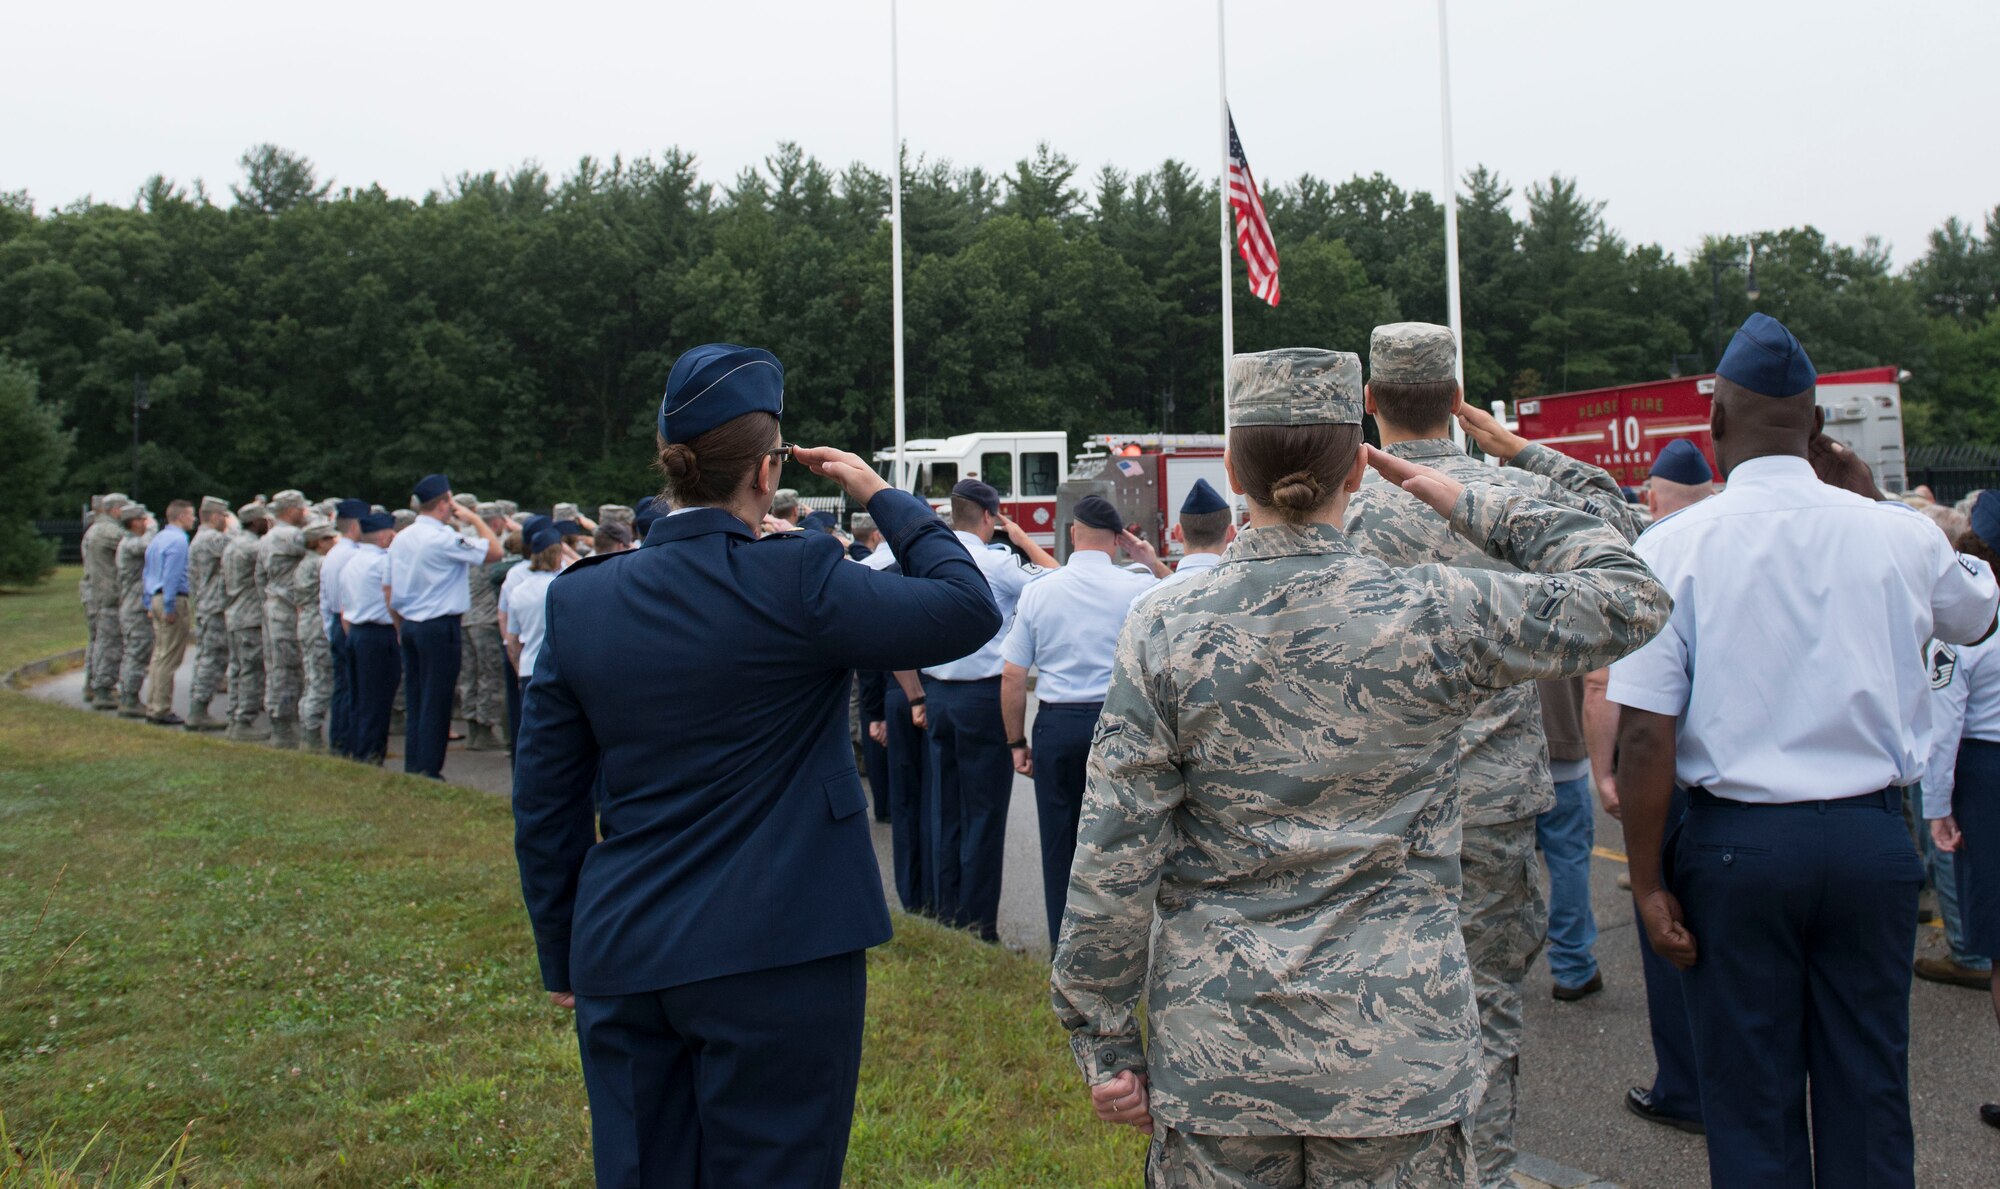 New Hampshire Air National Guard Airmen gather to remember the terrorist attacks of September 11, 2001 and pay tribute to the victims and families of those lost in New York, Pennsylvania and in the Pentagon, Pease Air National Guard Base, N.H, September 11, 2018. The 157th Air Refueling Wing continues to provide air refueling support for the War on Terror. Photo by Master. Sgt. Thomas Johnson, 157th ARW Public Affairs.